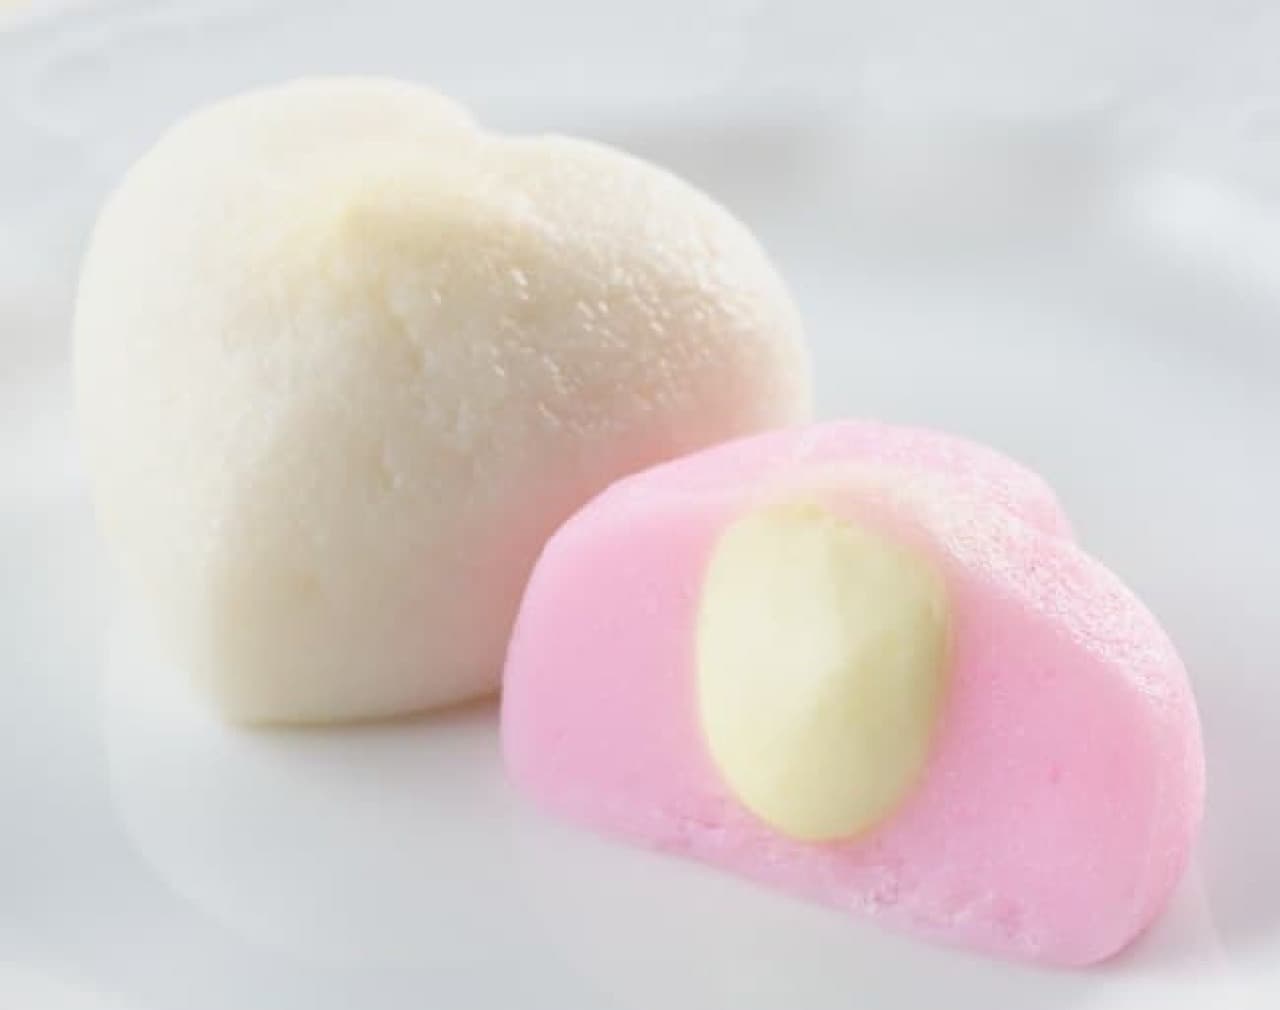 Kamaboko "Pure Heart" for Valentine's Day